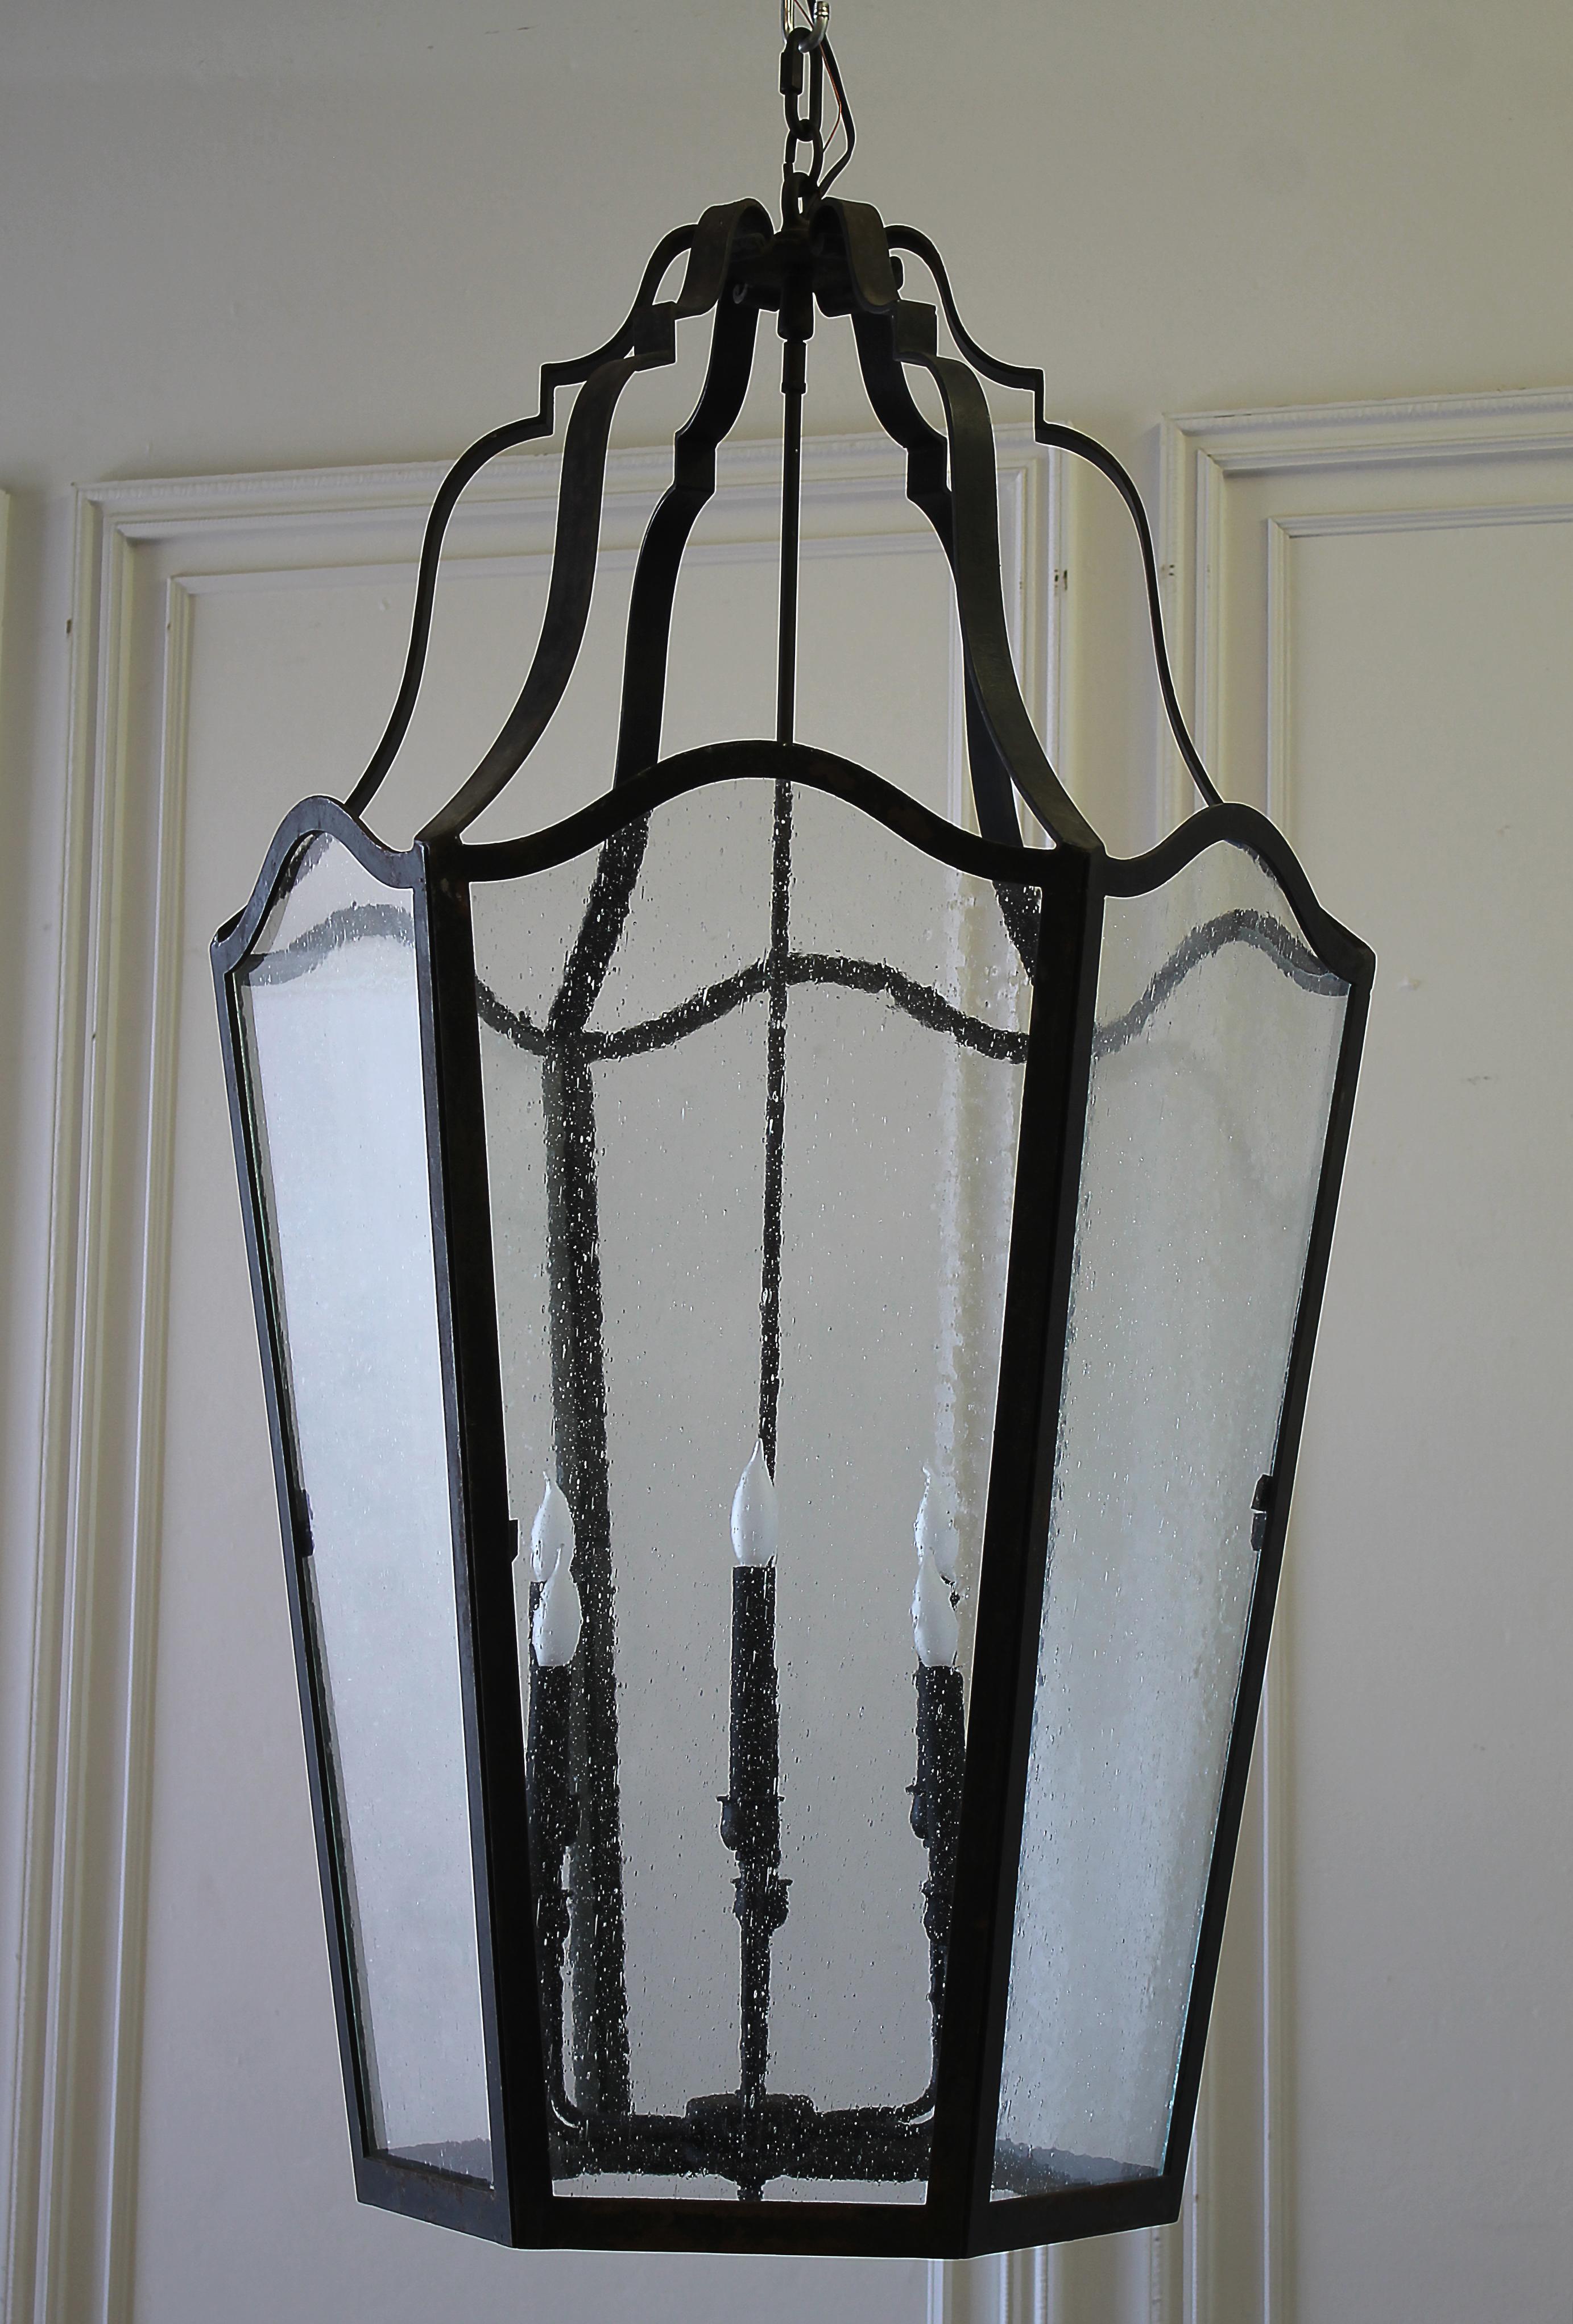 Custom-made iron lantern chandelier with seeded glass

Measures: 46